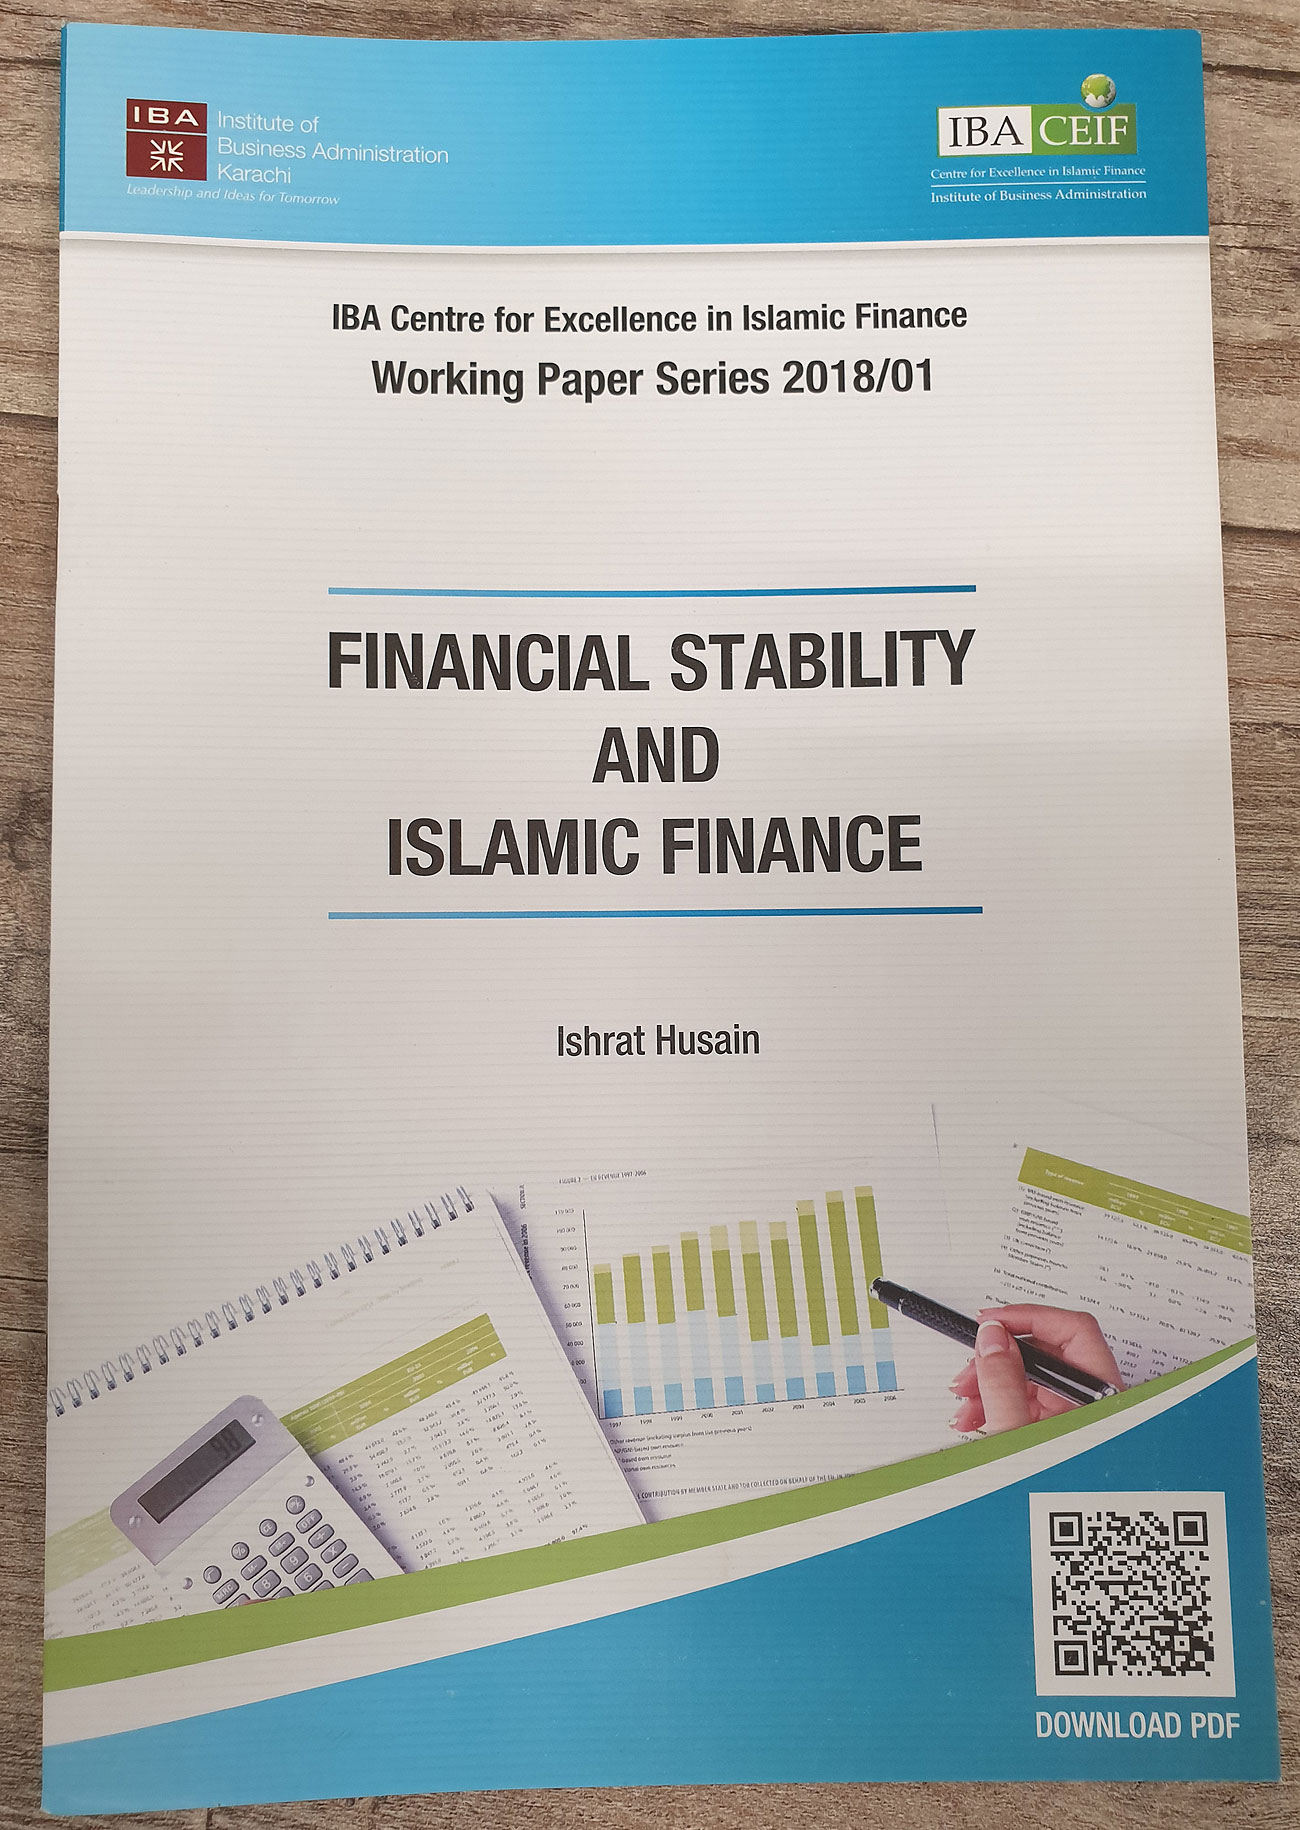 “Financial Stability And Islamic Finance by Dr. Ishrat Husain